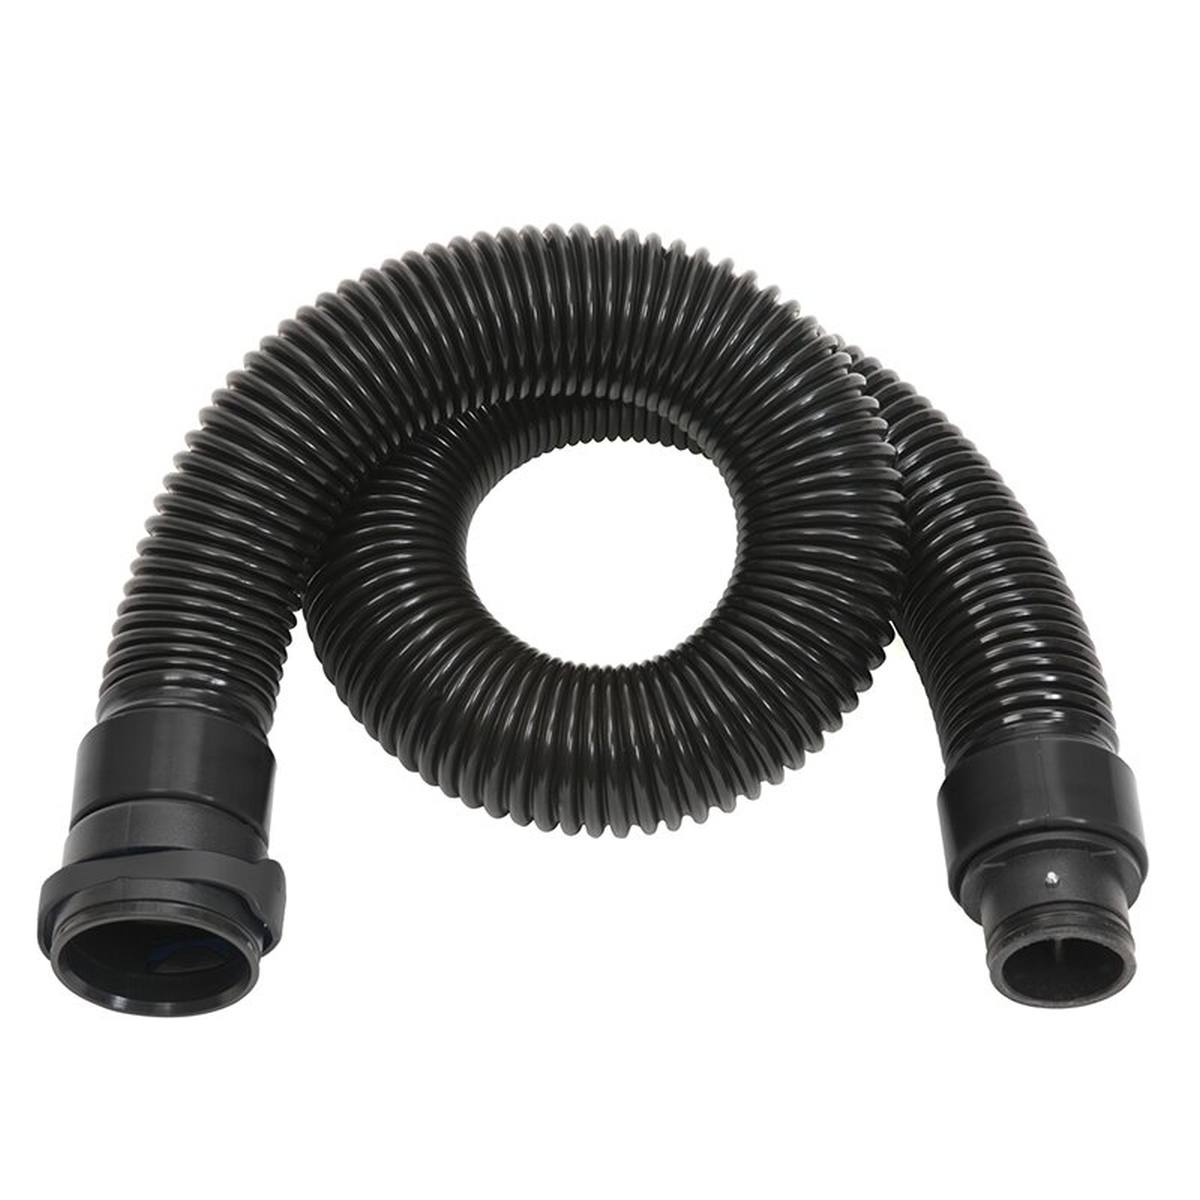 3M QRS hose for particulate filter, standard, extra long #834019